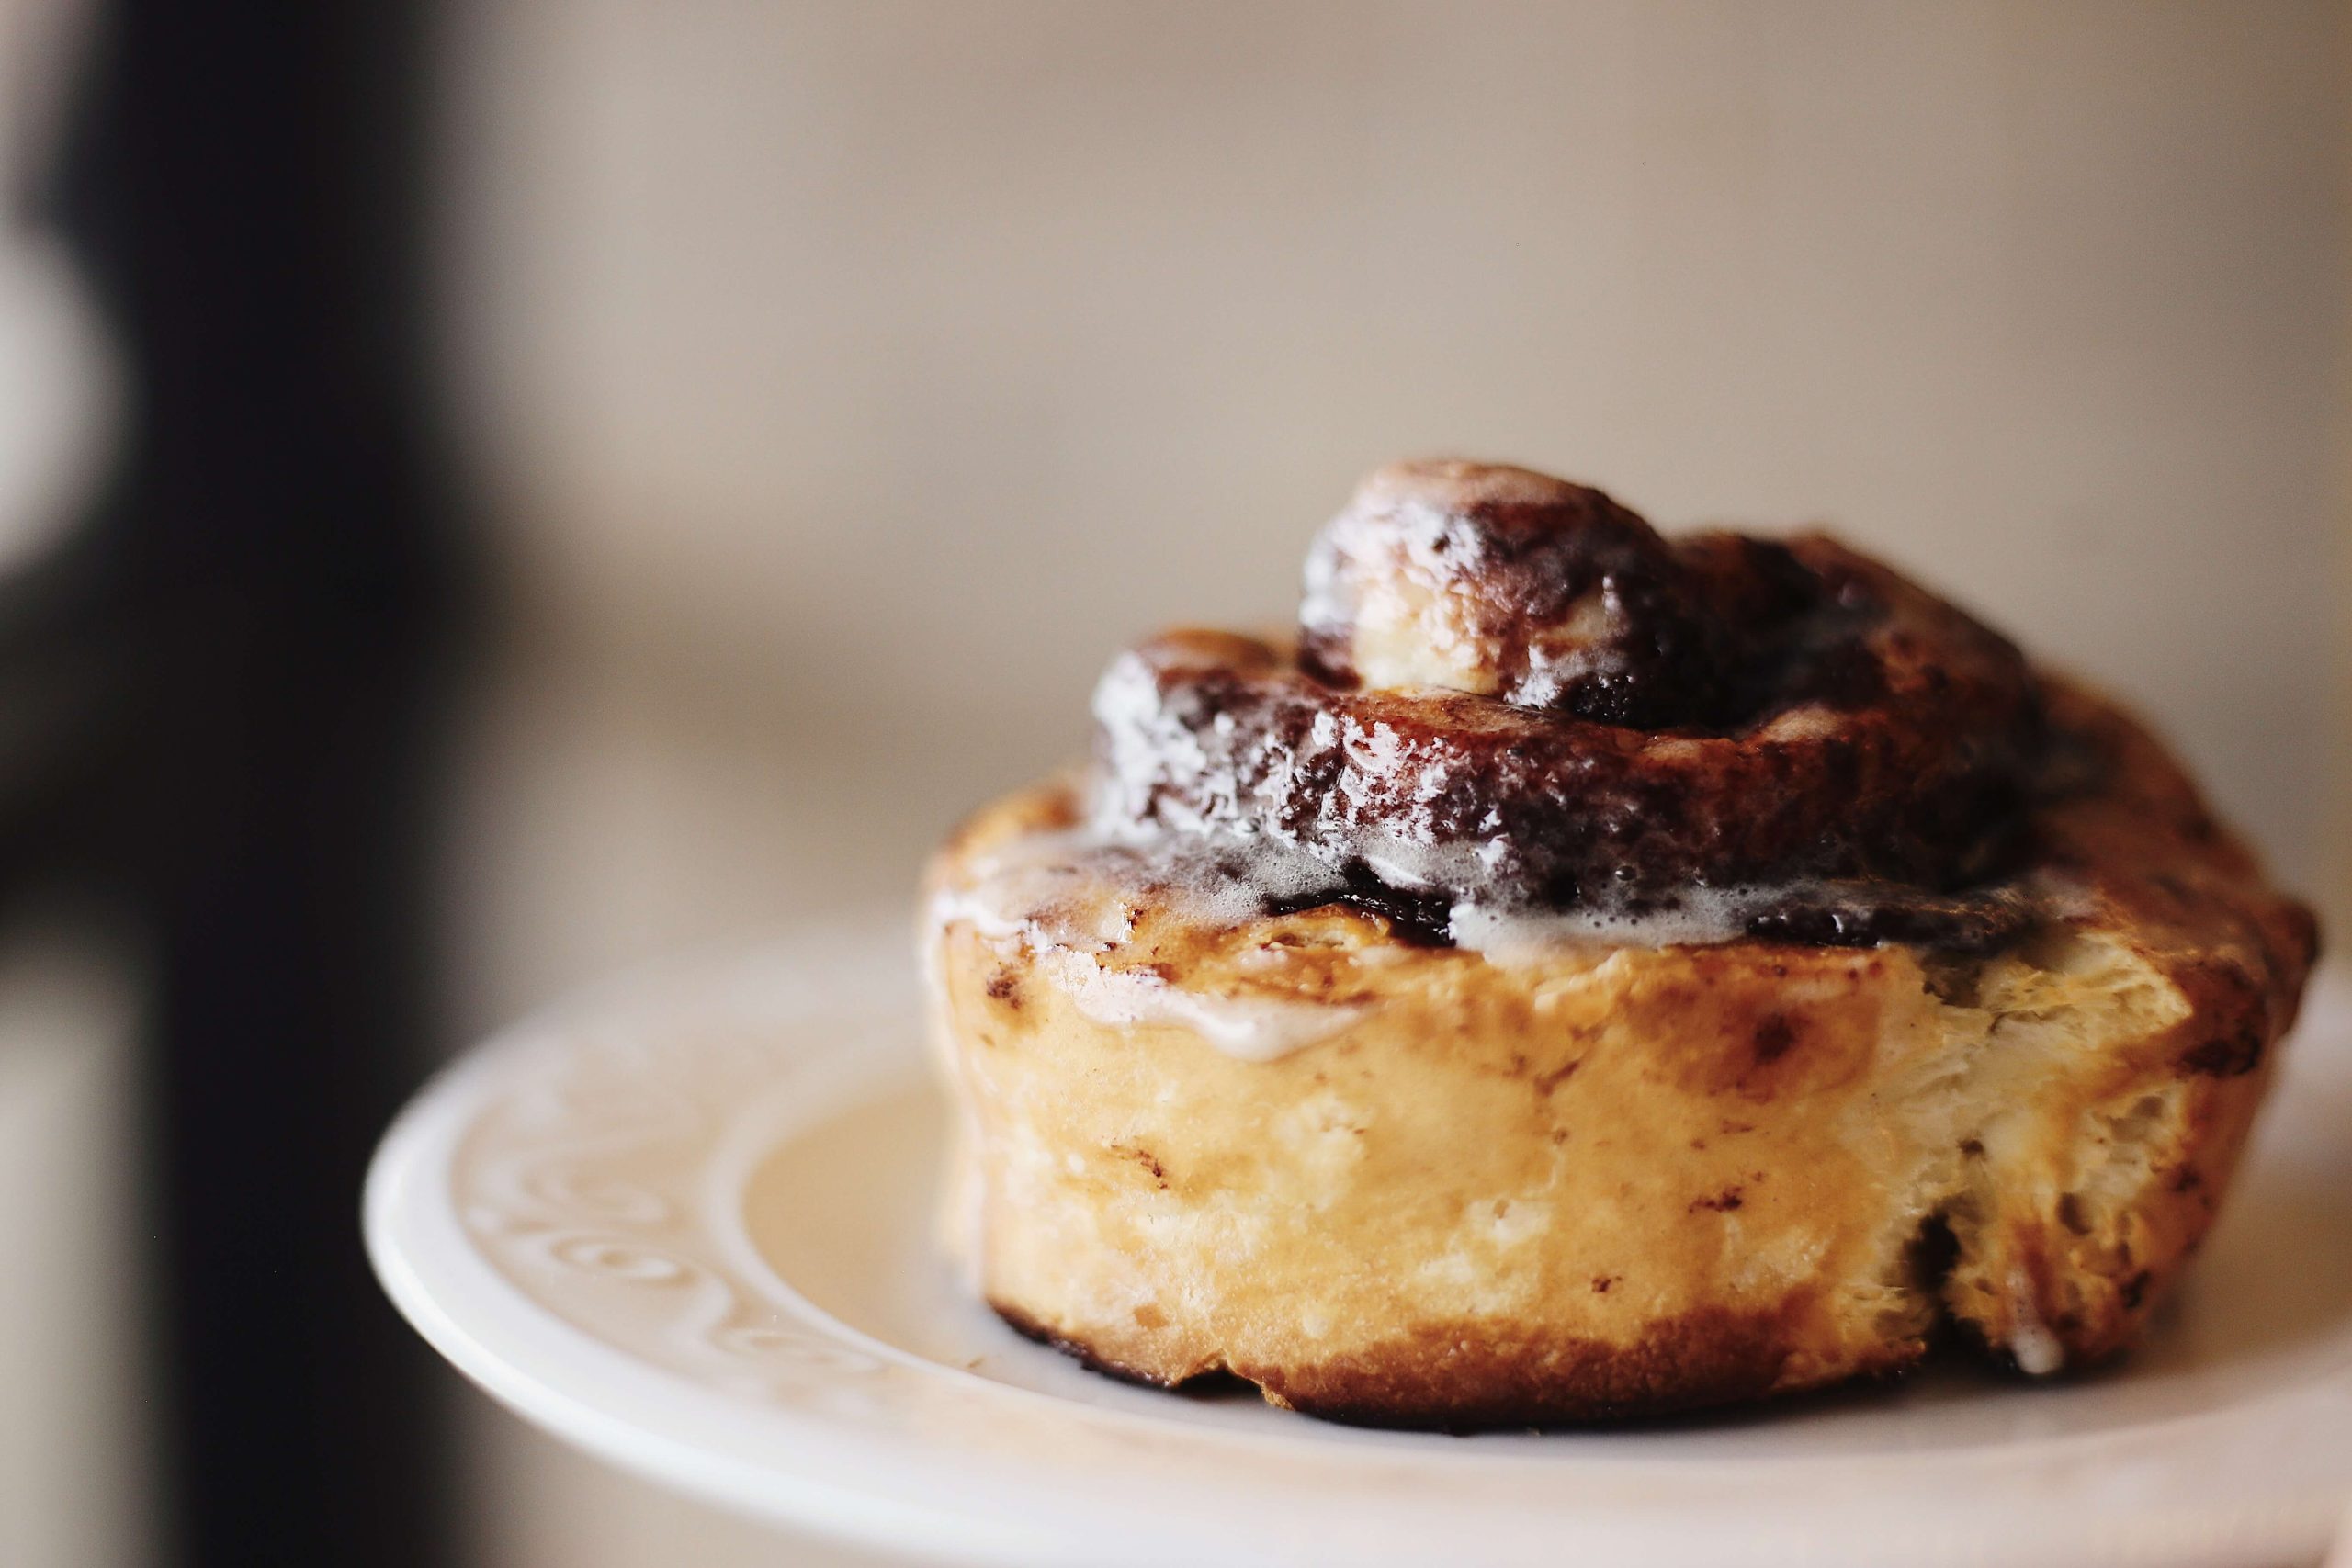 How Many Calories Are In A Cinnamon Roll?